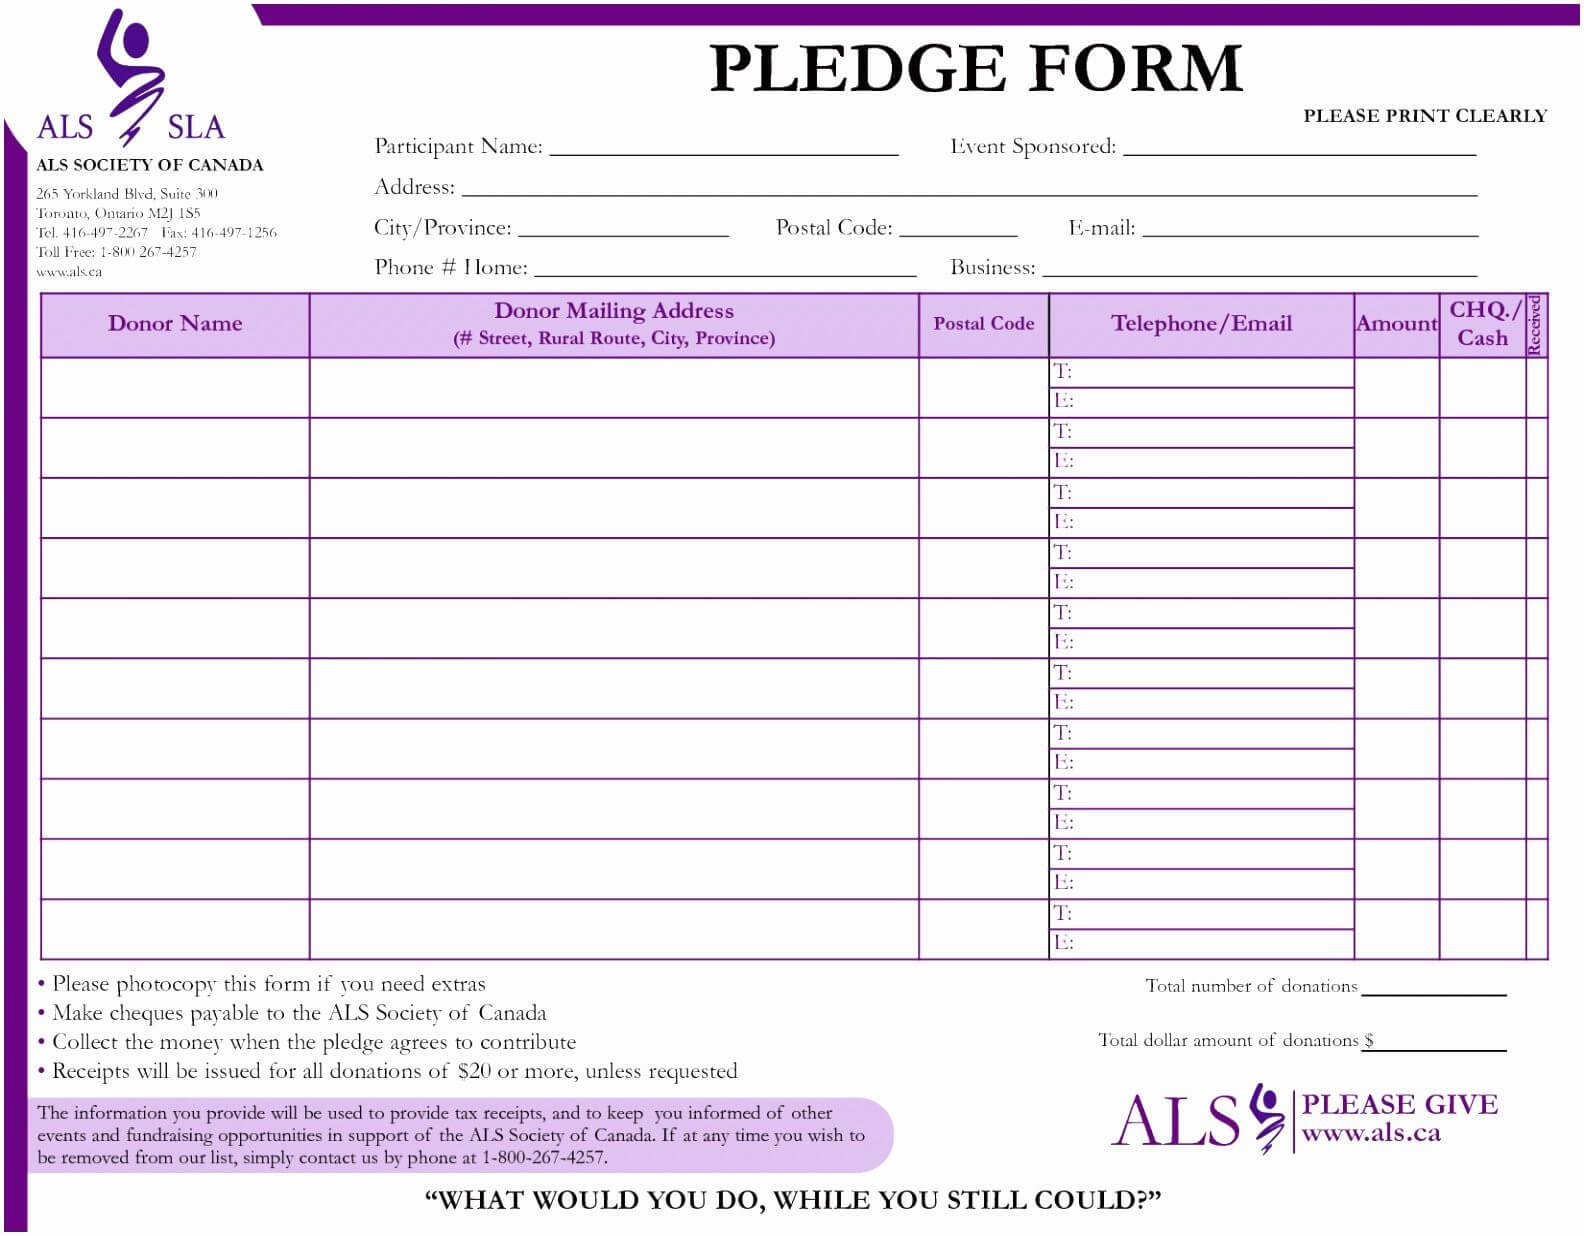 039 Pledge Card Template Word Best Of Fundraiser Form Pttyt With Regard To Fundraising Pledge Card Template